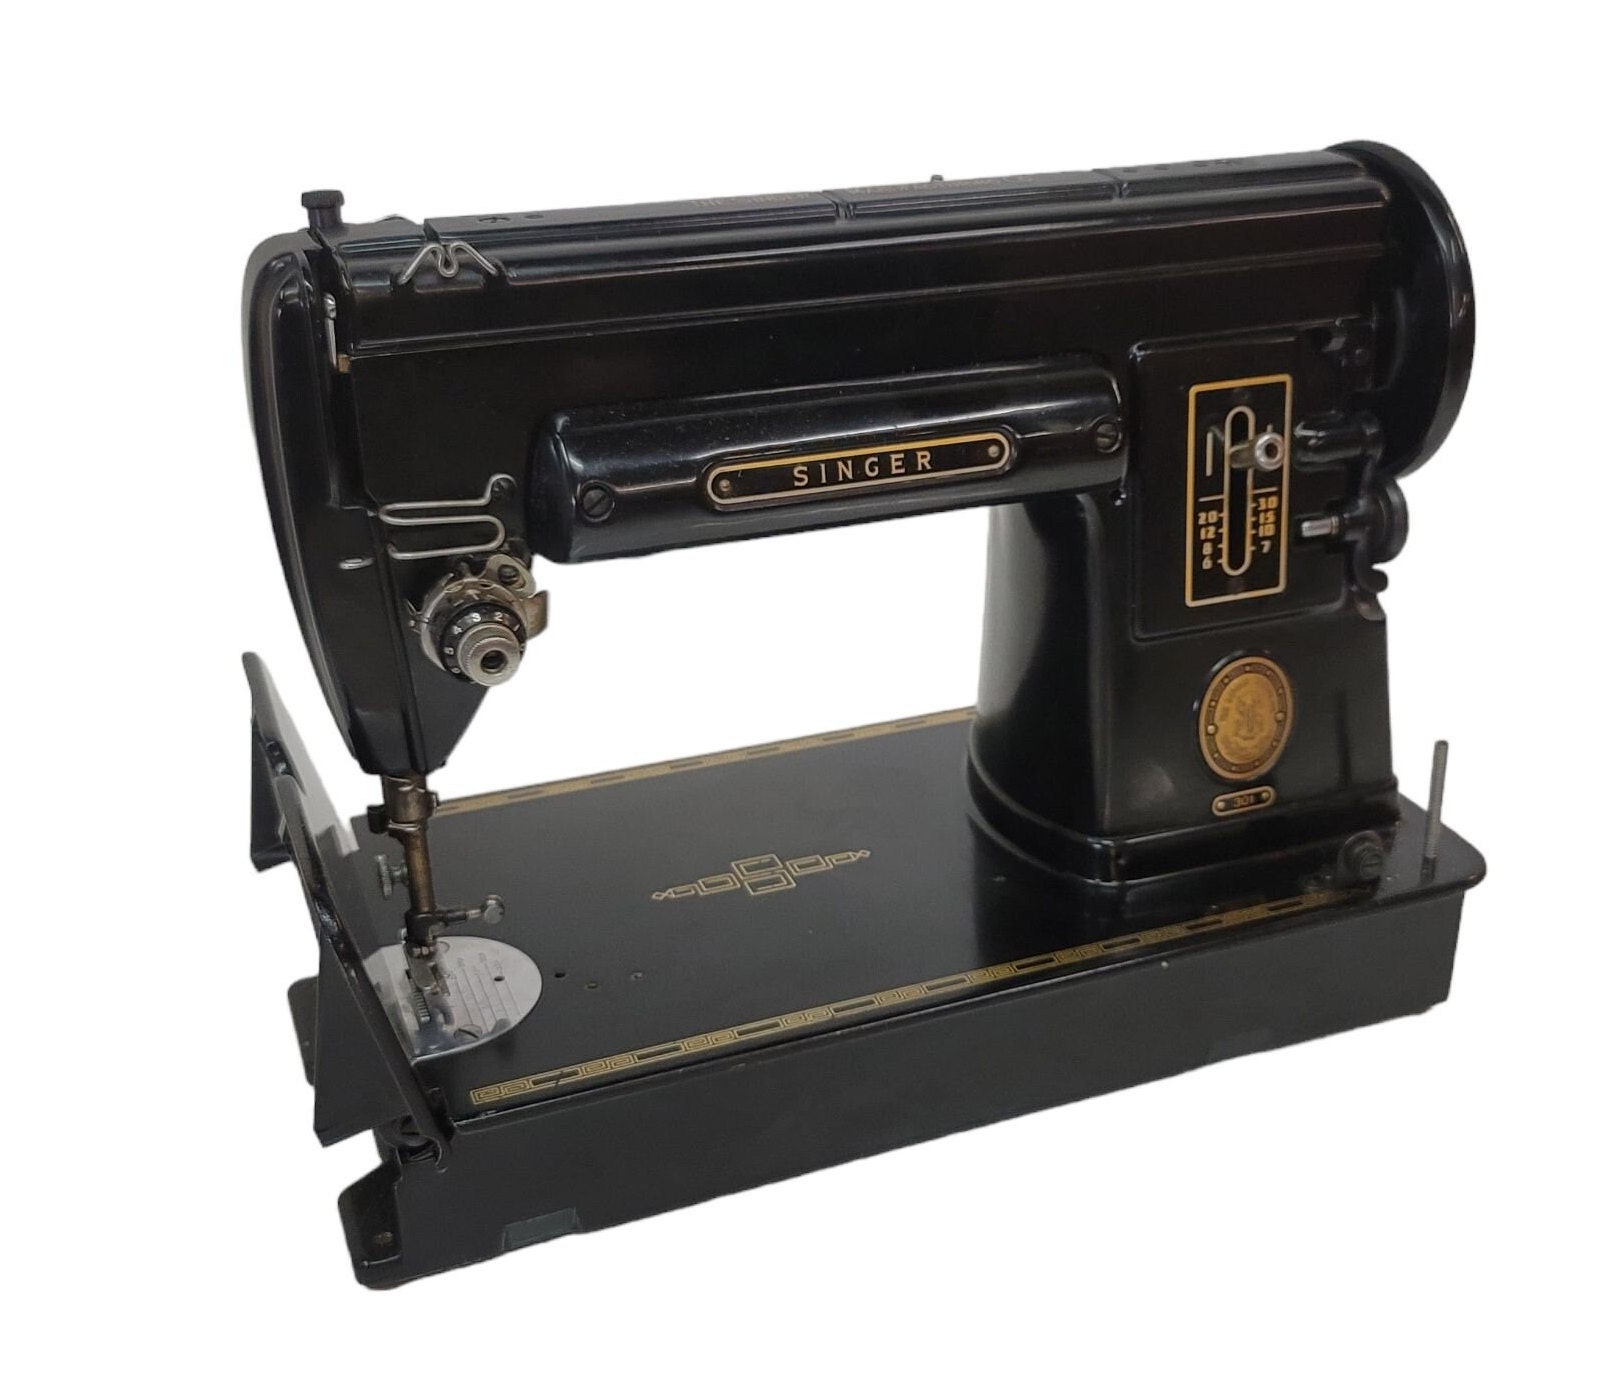 Singer Sewing Machines for sale in Luella, Texas, Facebook Marketplace